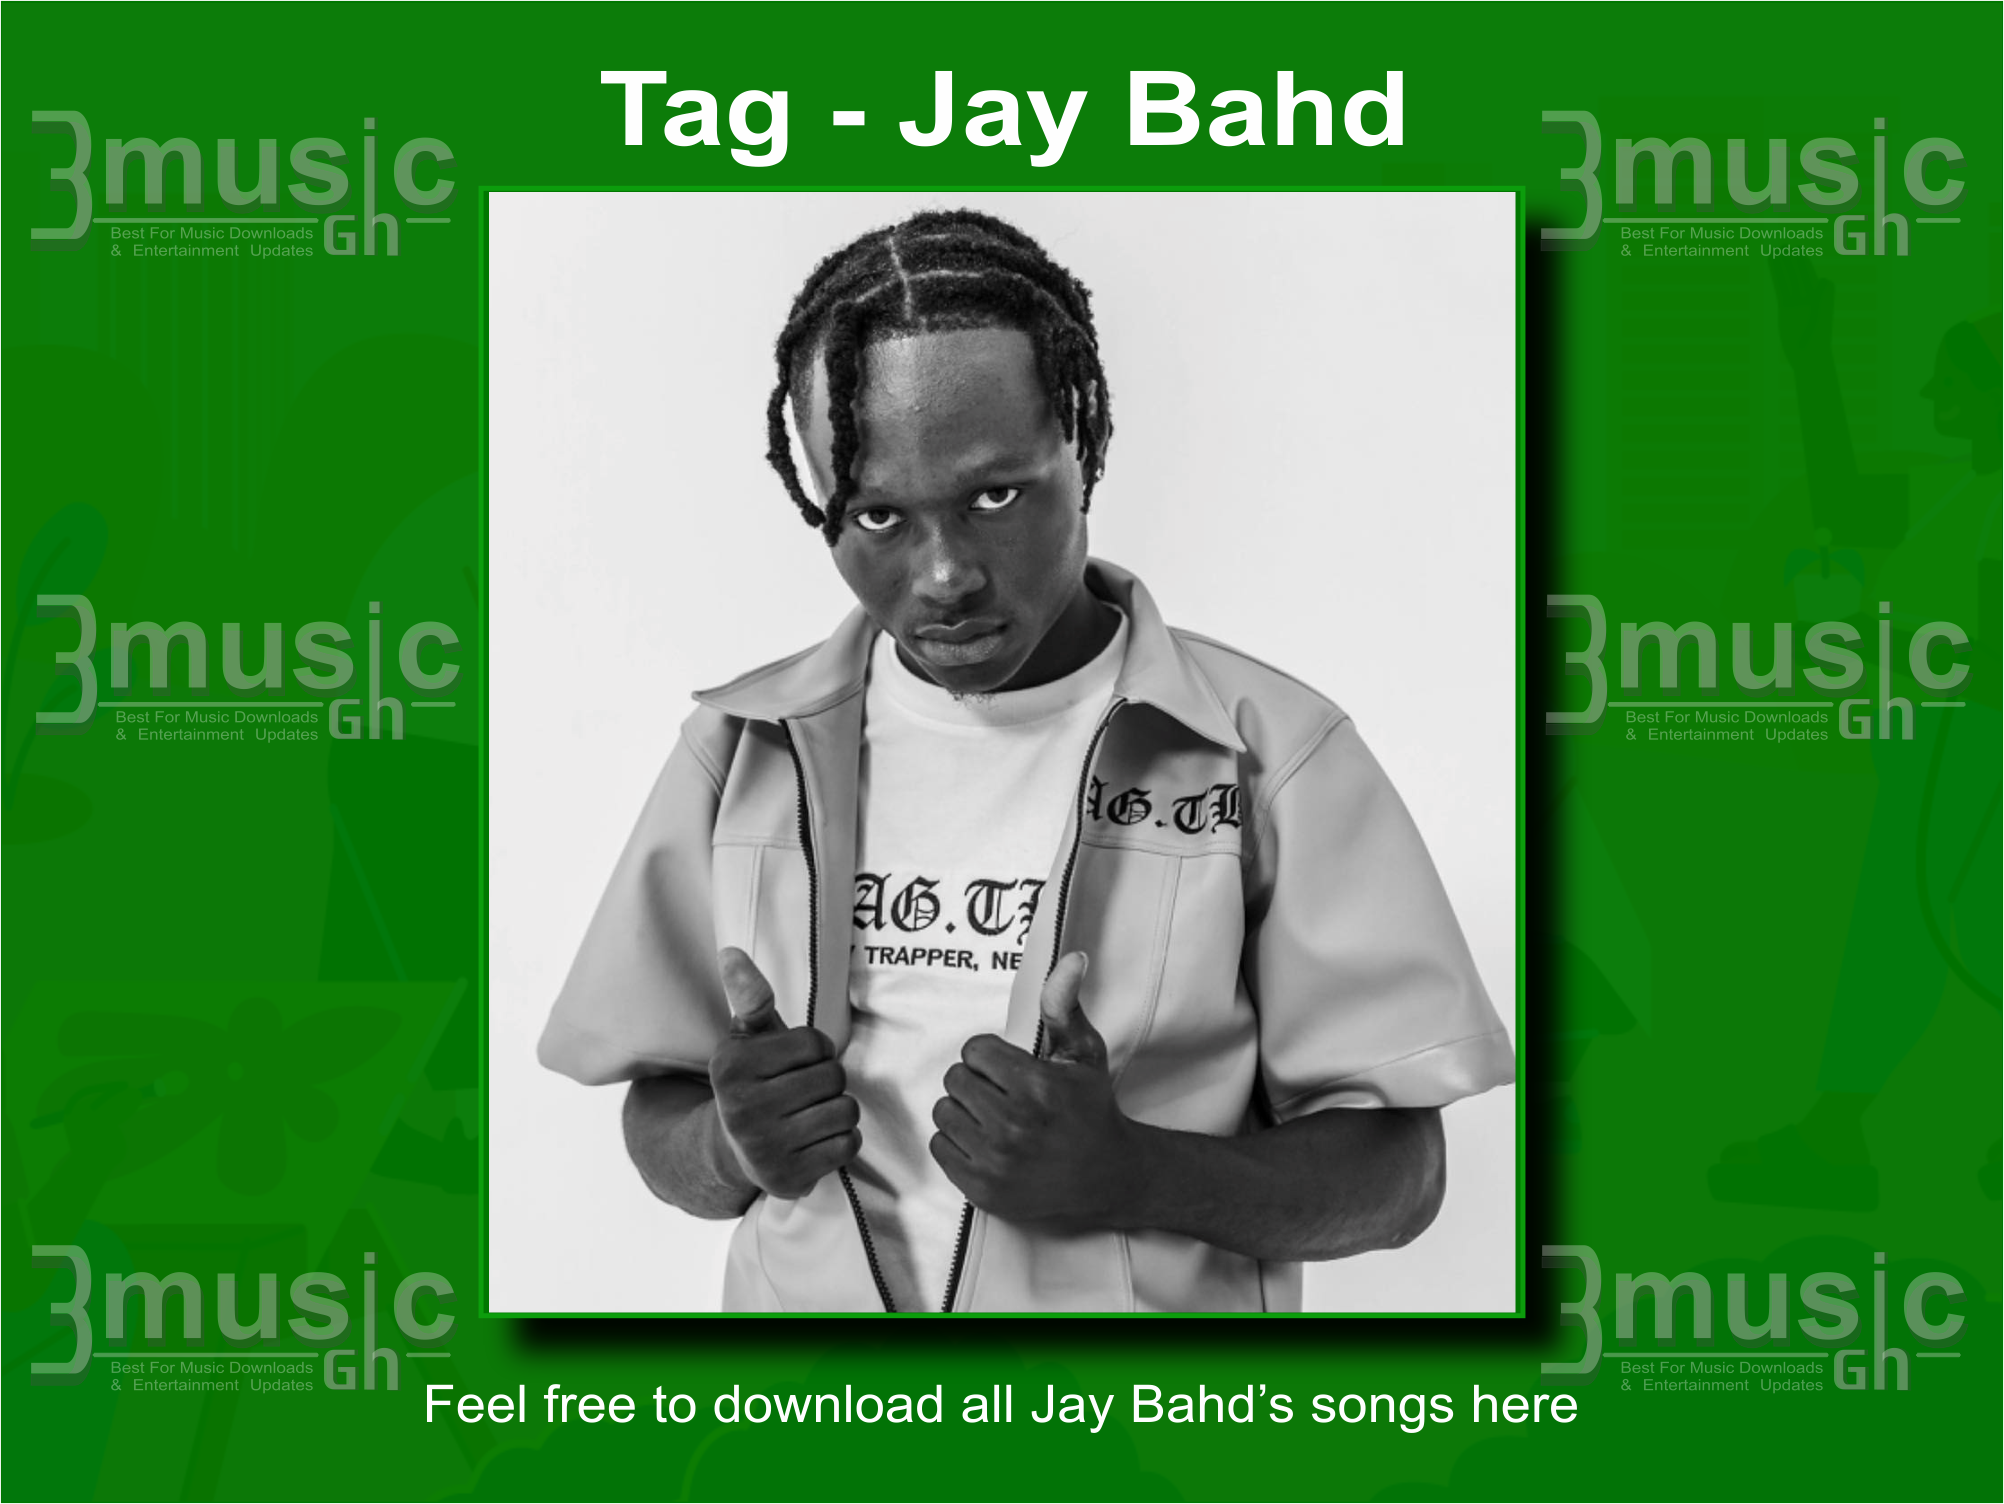 Jay Bahd songs all download_ 3musicgh.com